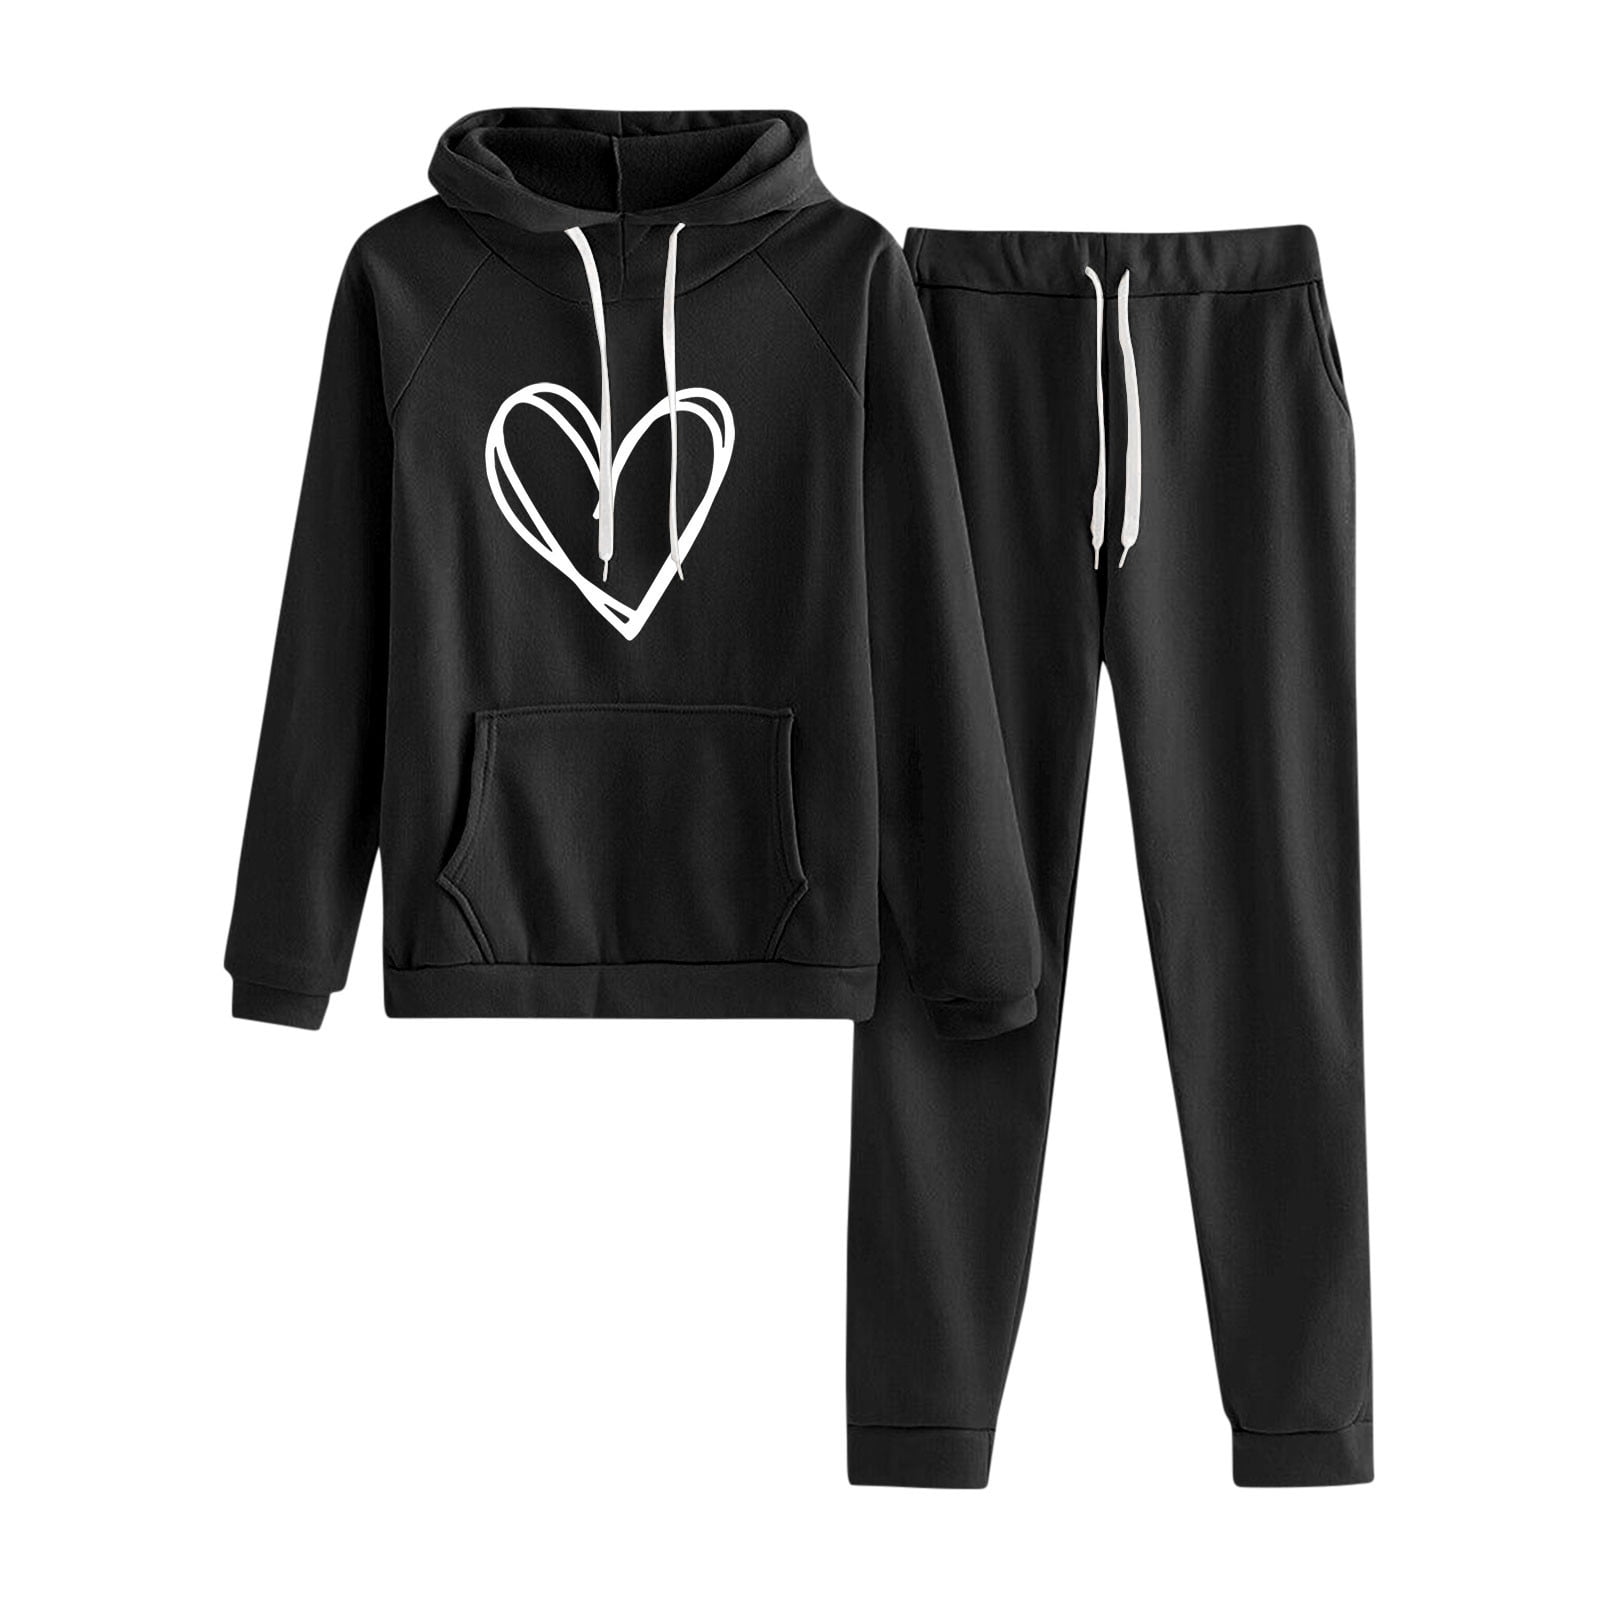 Amtdh Women's 2 Piece Sweatsuits Clearance Love Printed Hooded ...